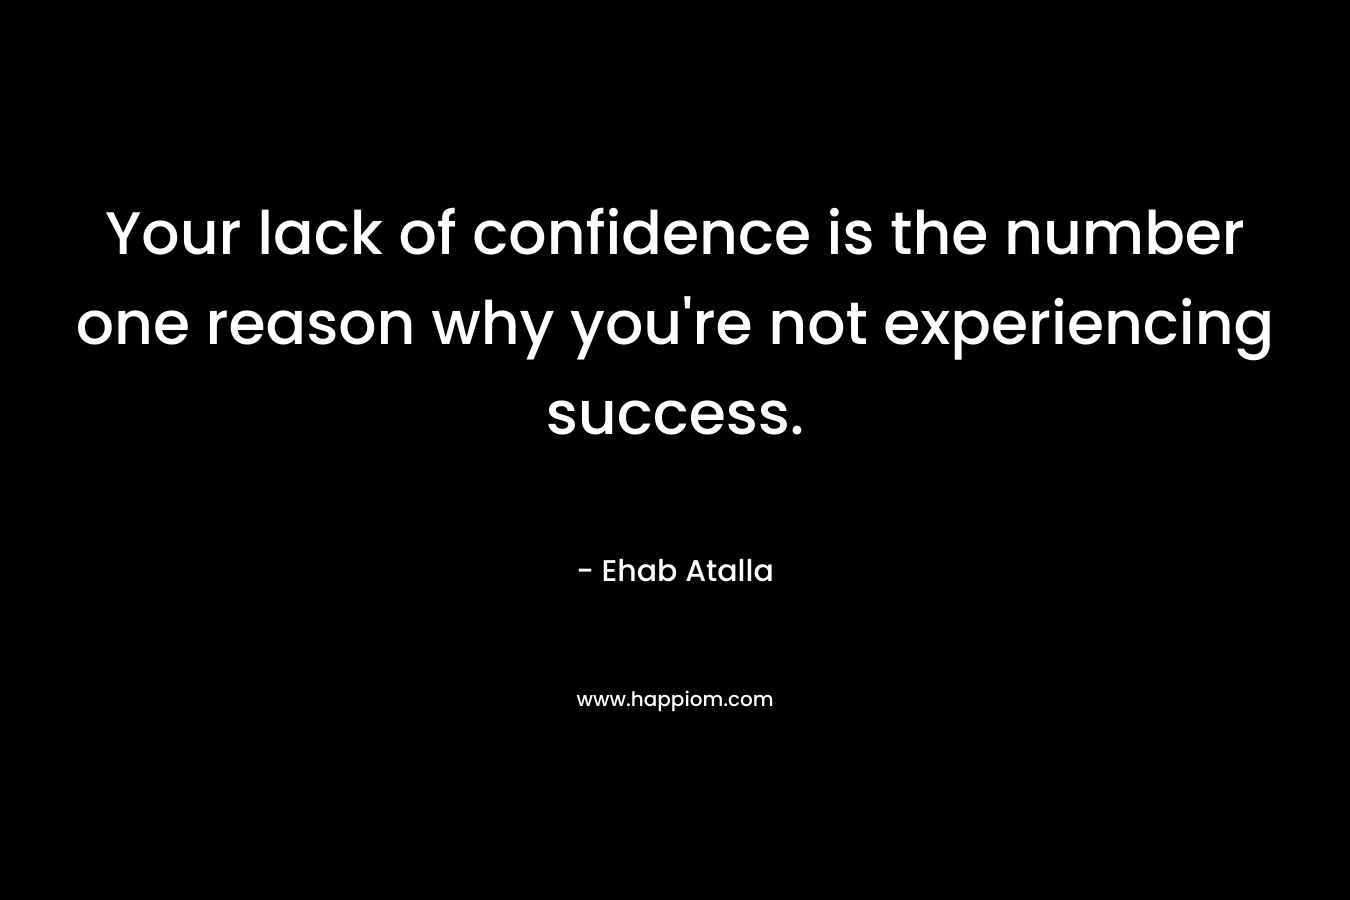 Your lack of confidence is the number one reason why you're not experiencing success.